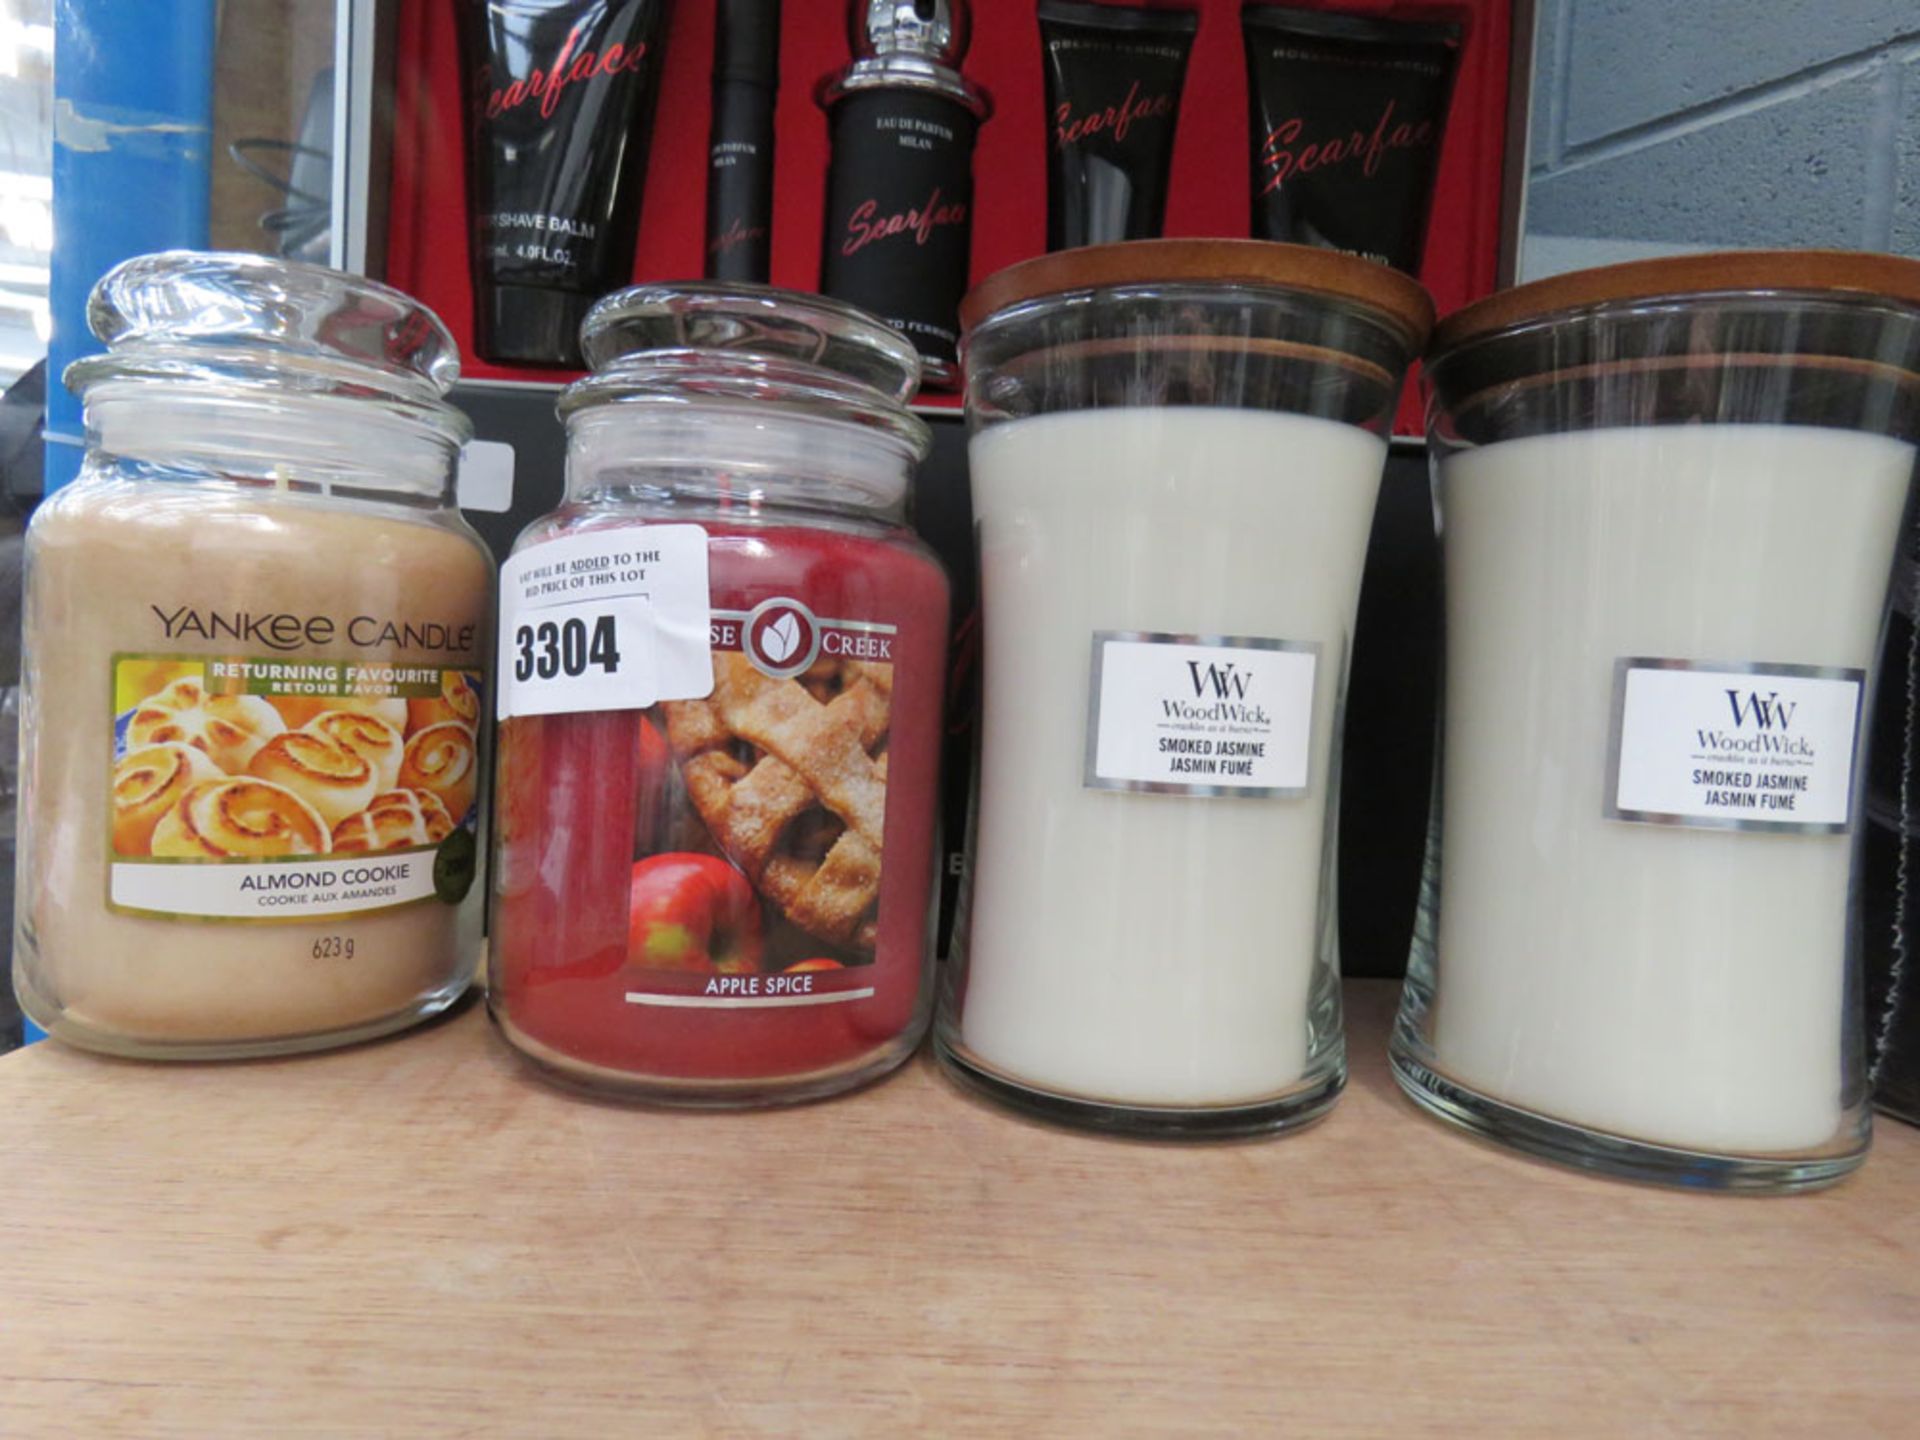 Goose Creek candle plus a Yankee candle and 2 Woodwick candles